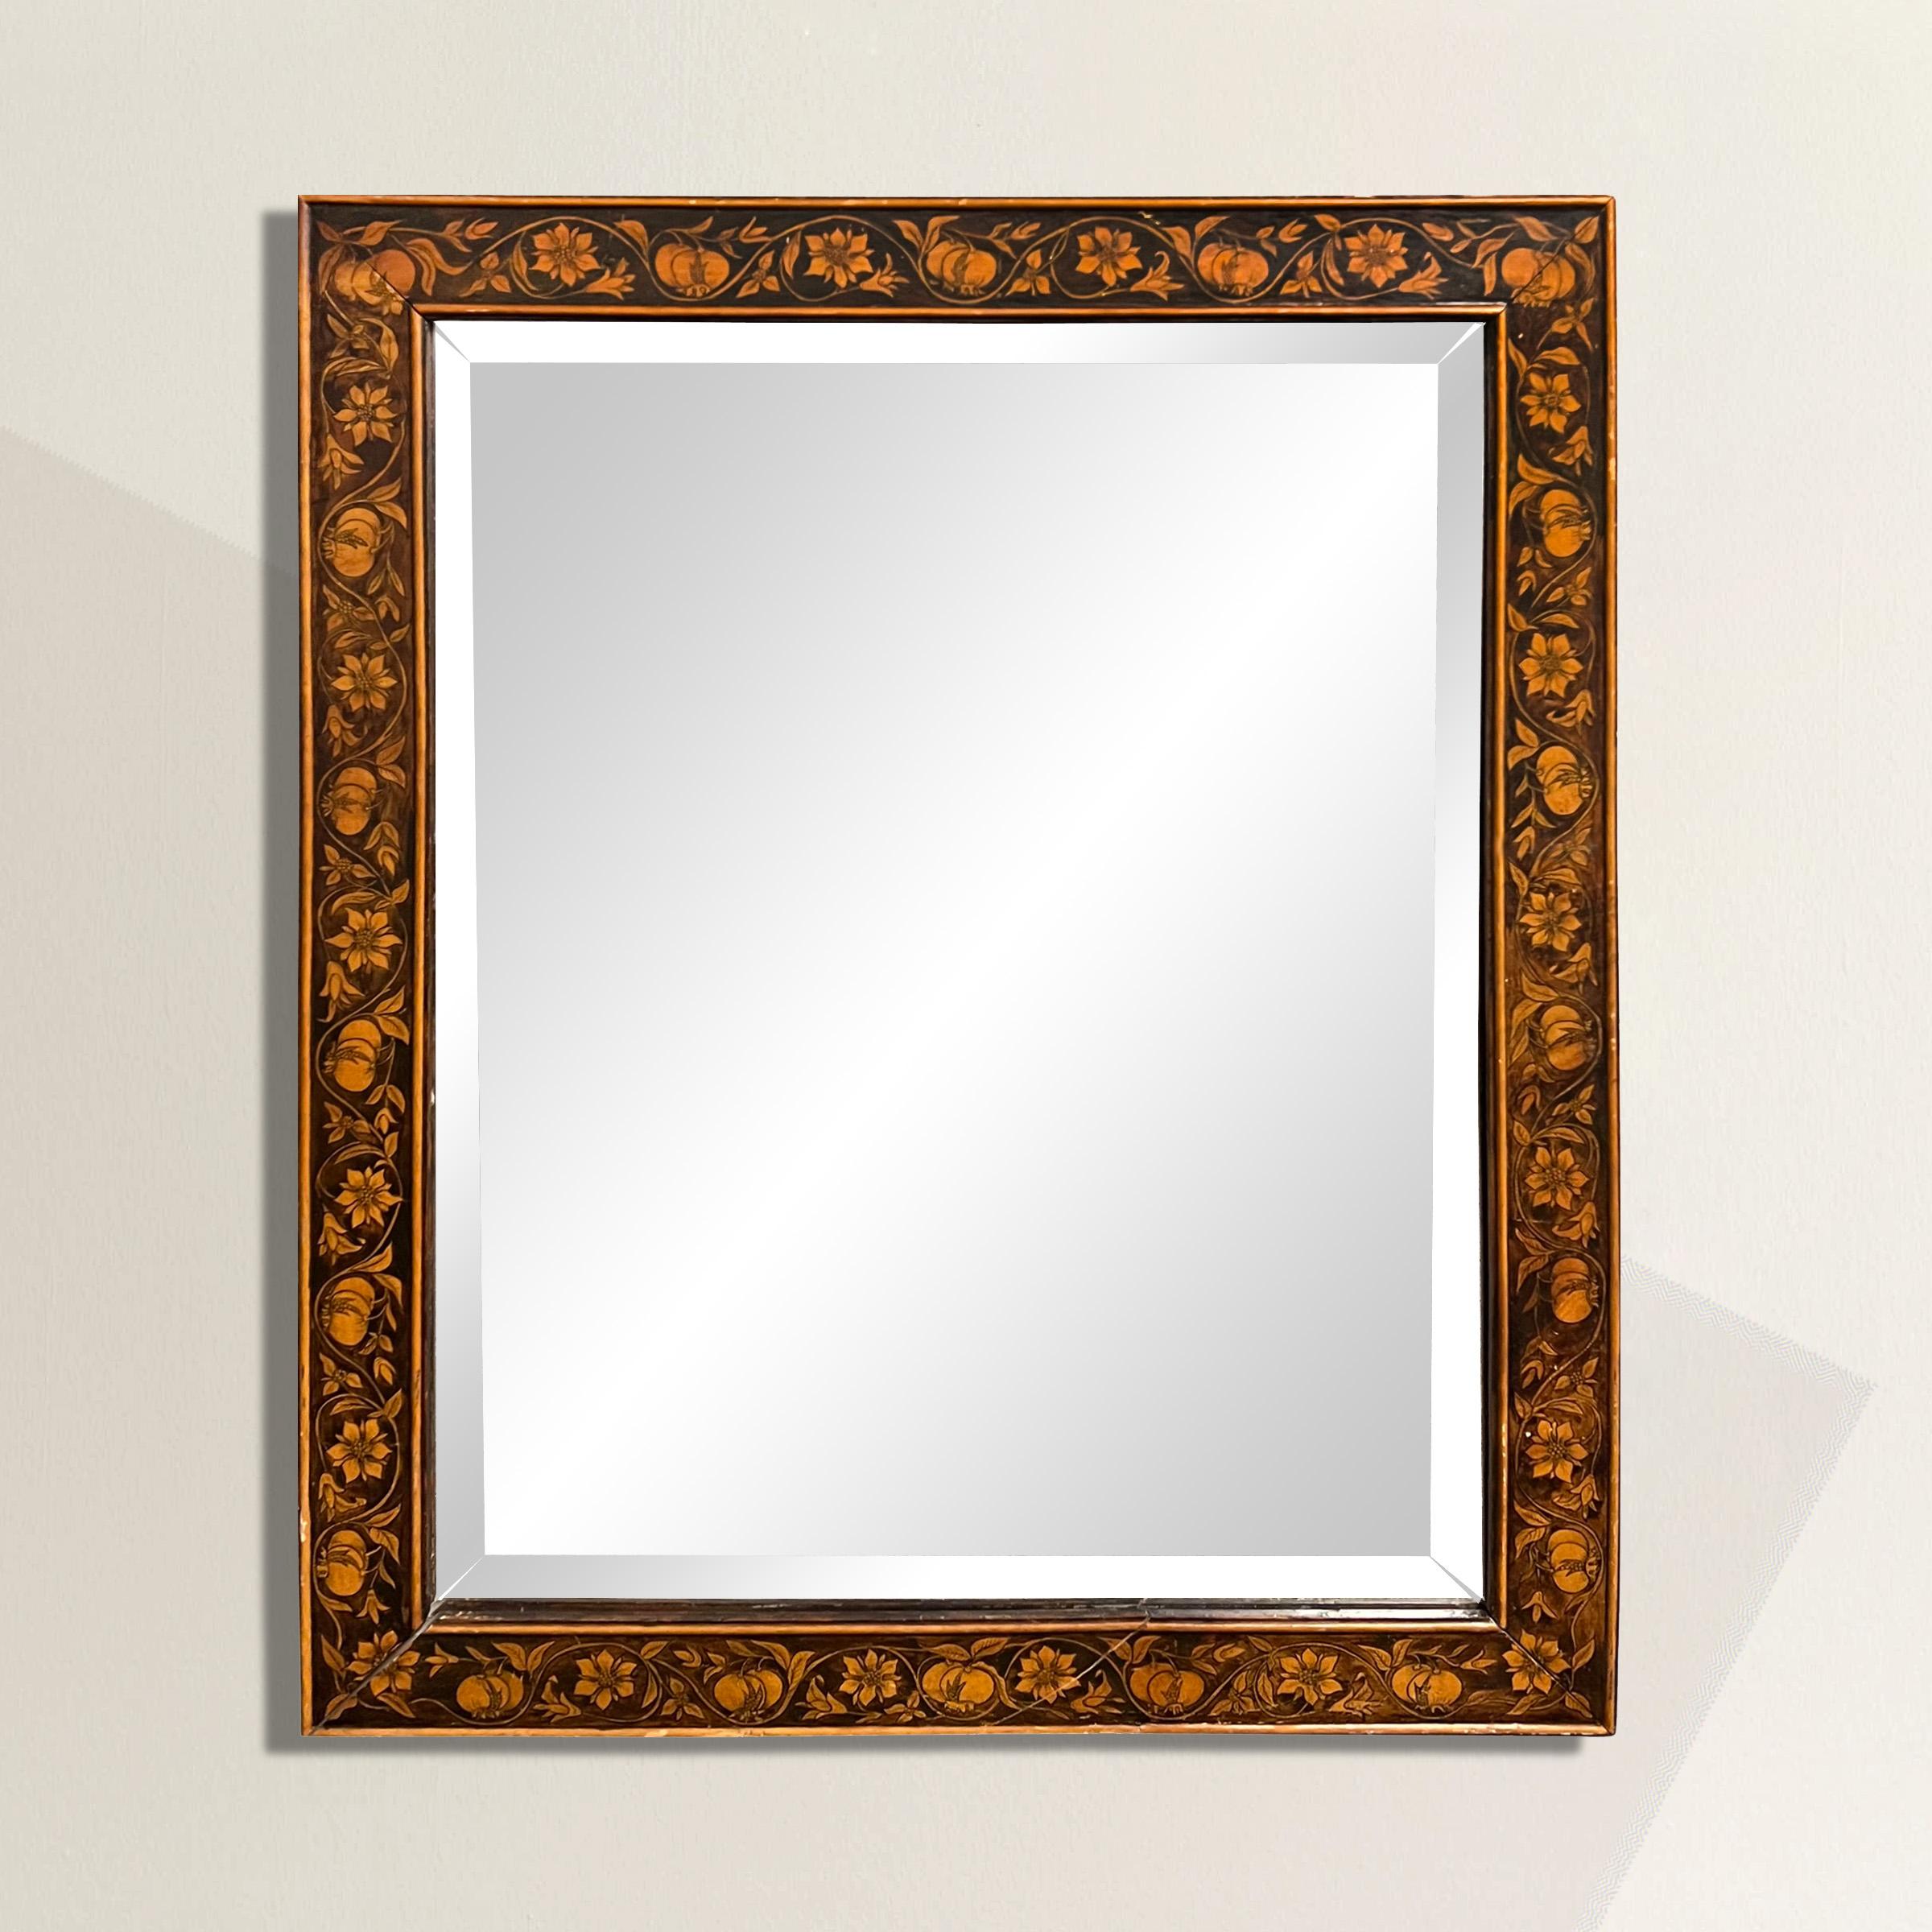 This exquisite 20th century framed mirror is a true masterpiece, adorned with delicately painted scrolling vines with pomegranate flowers and fruits that gracefully cover the face of the frame. The intricate detailing and craftsmanship captivate the